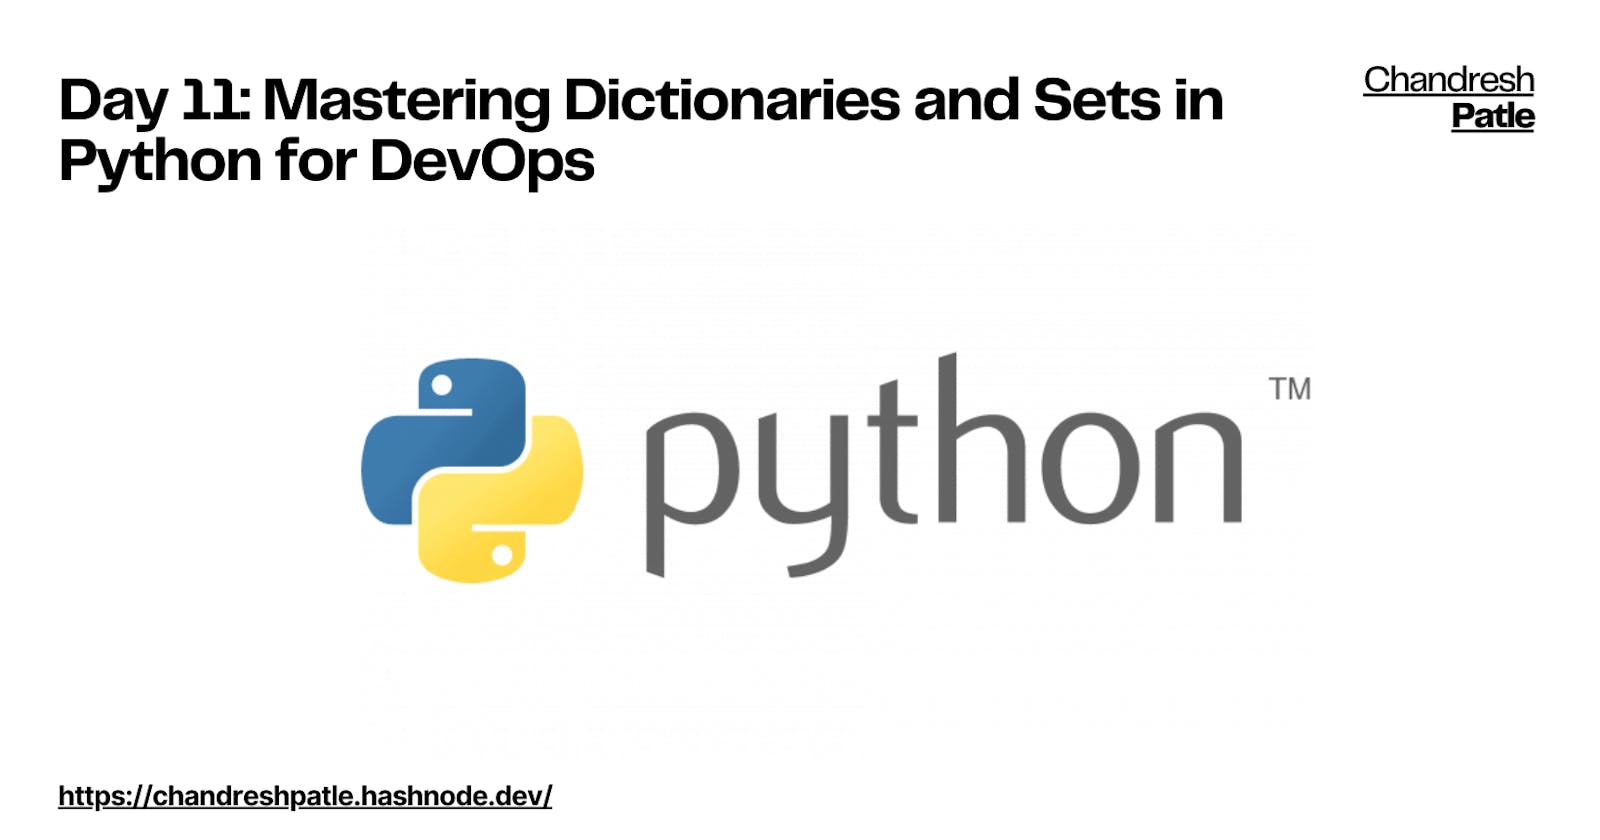 Day 11: Mastering Dictionaries and Sets in Python for DevOps